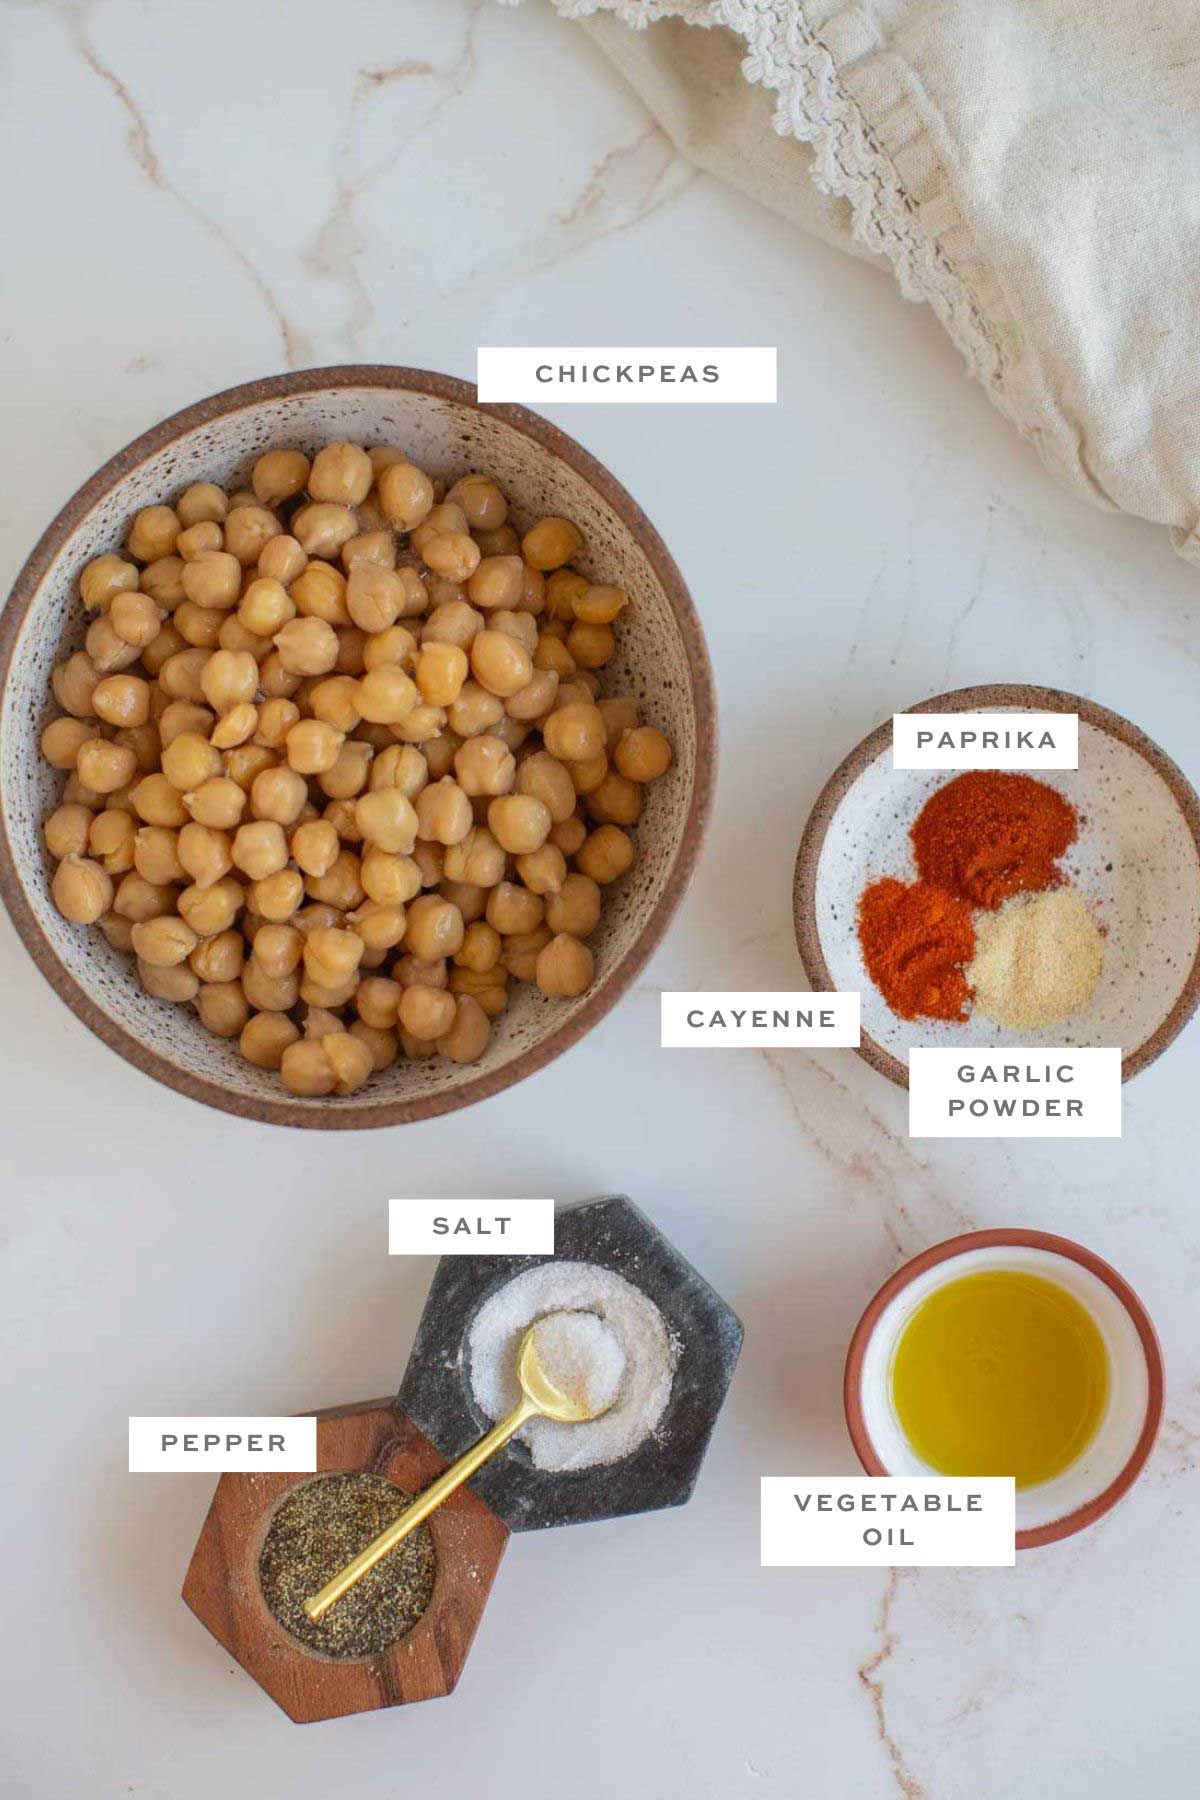 Key ingredients for roasted chickpeas with labels.